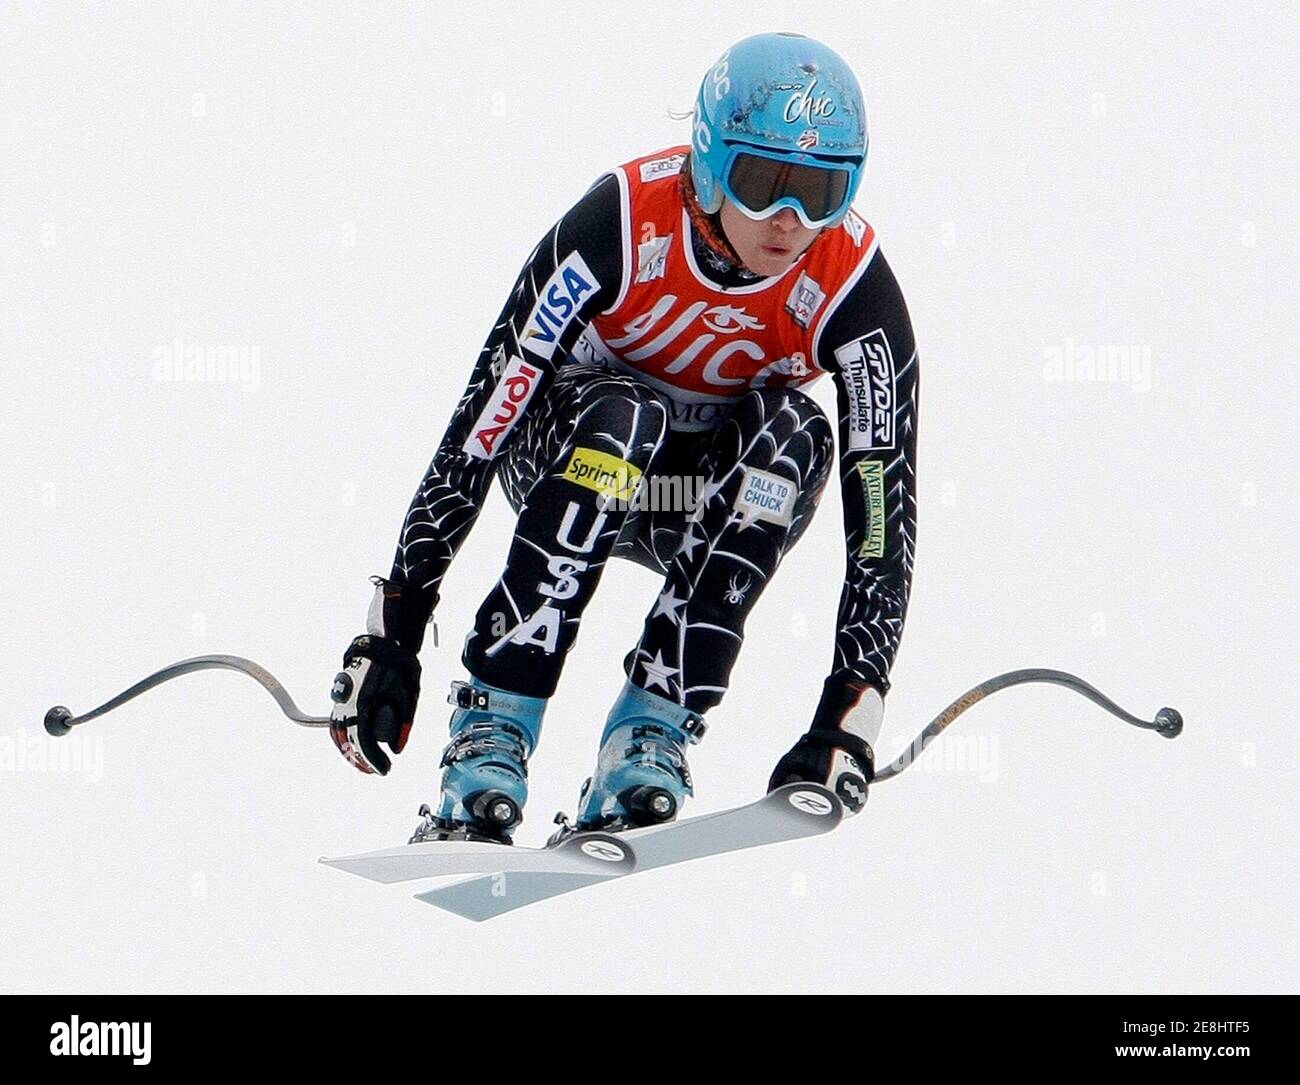 Julia Mancuso of the U.S. takes a jump during the women's Alpine Skiing World Cup downhill race in the Swiss mountain resort of Crans-Montana March 8, 2008. Lindsey Vonn of the U.S. won the race ahead of Austria's Renate Goetschl and Nadia Fanchini of Italy. Mancuso finished in fourth place. REUTERS/Pascal Lauener (Switzerland) Stock Photo